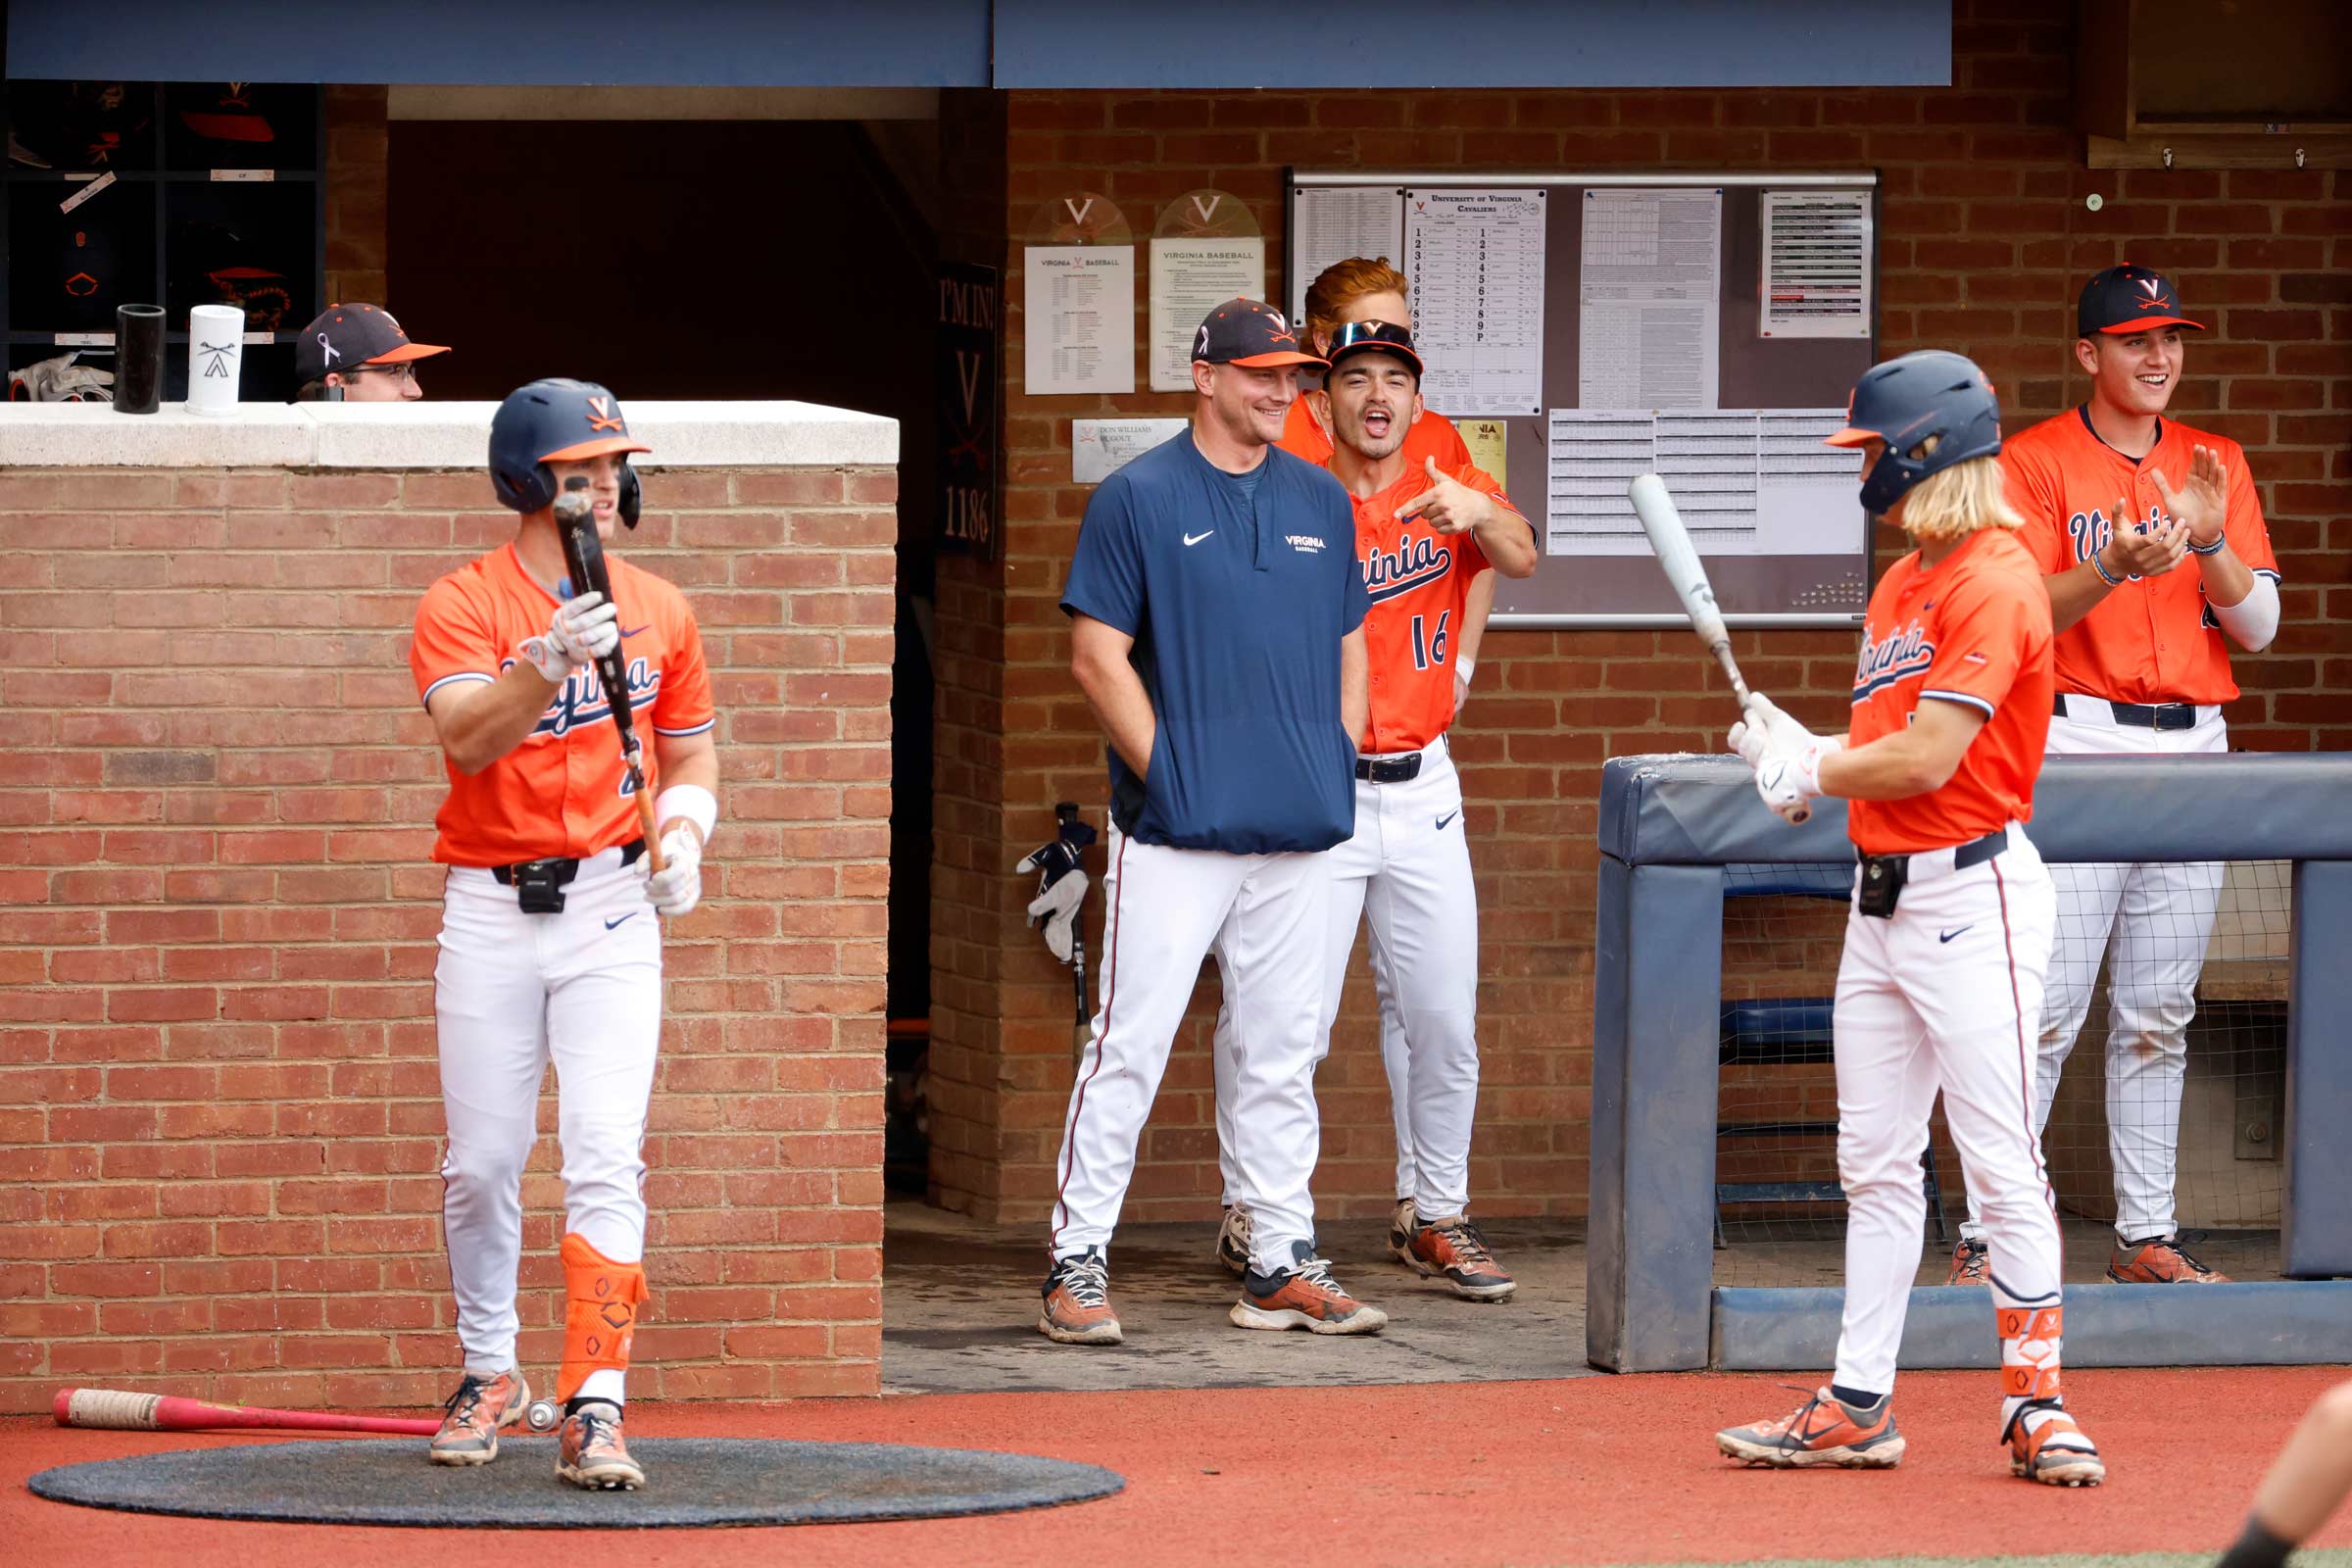 Candid Picture of Hicks with UVA Baseball team